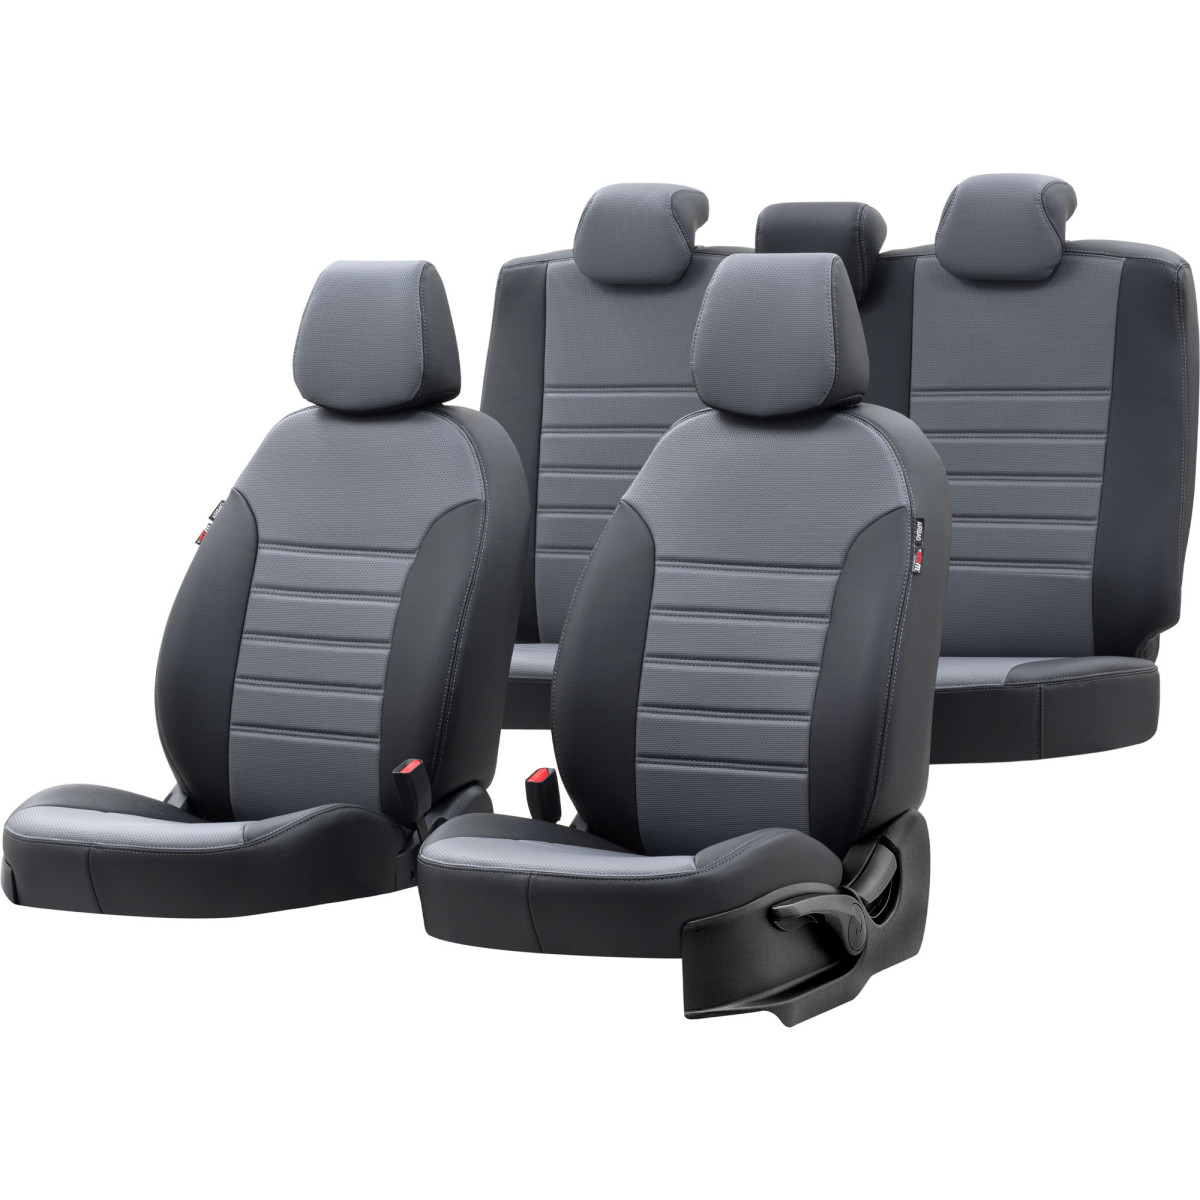 New York seat covers (eco leather) Nissan Qashqai I +2 (7 places)